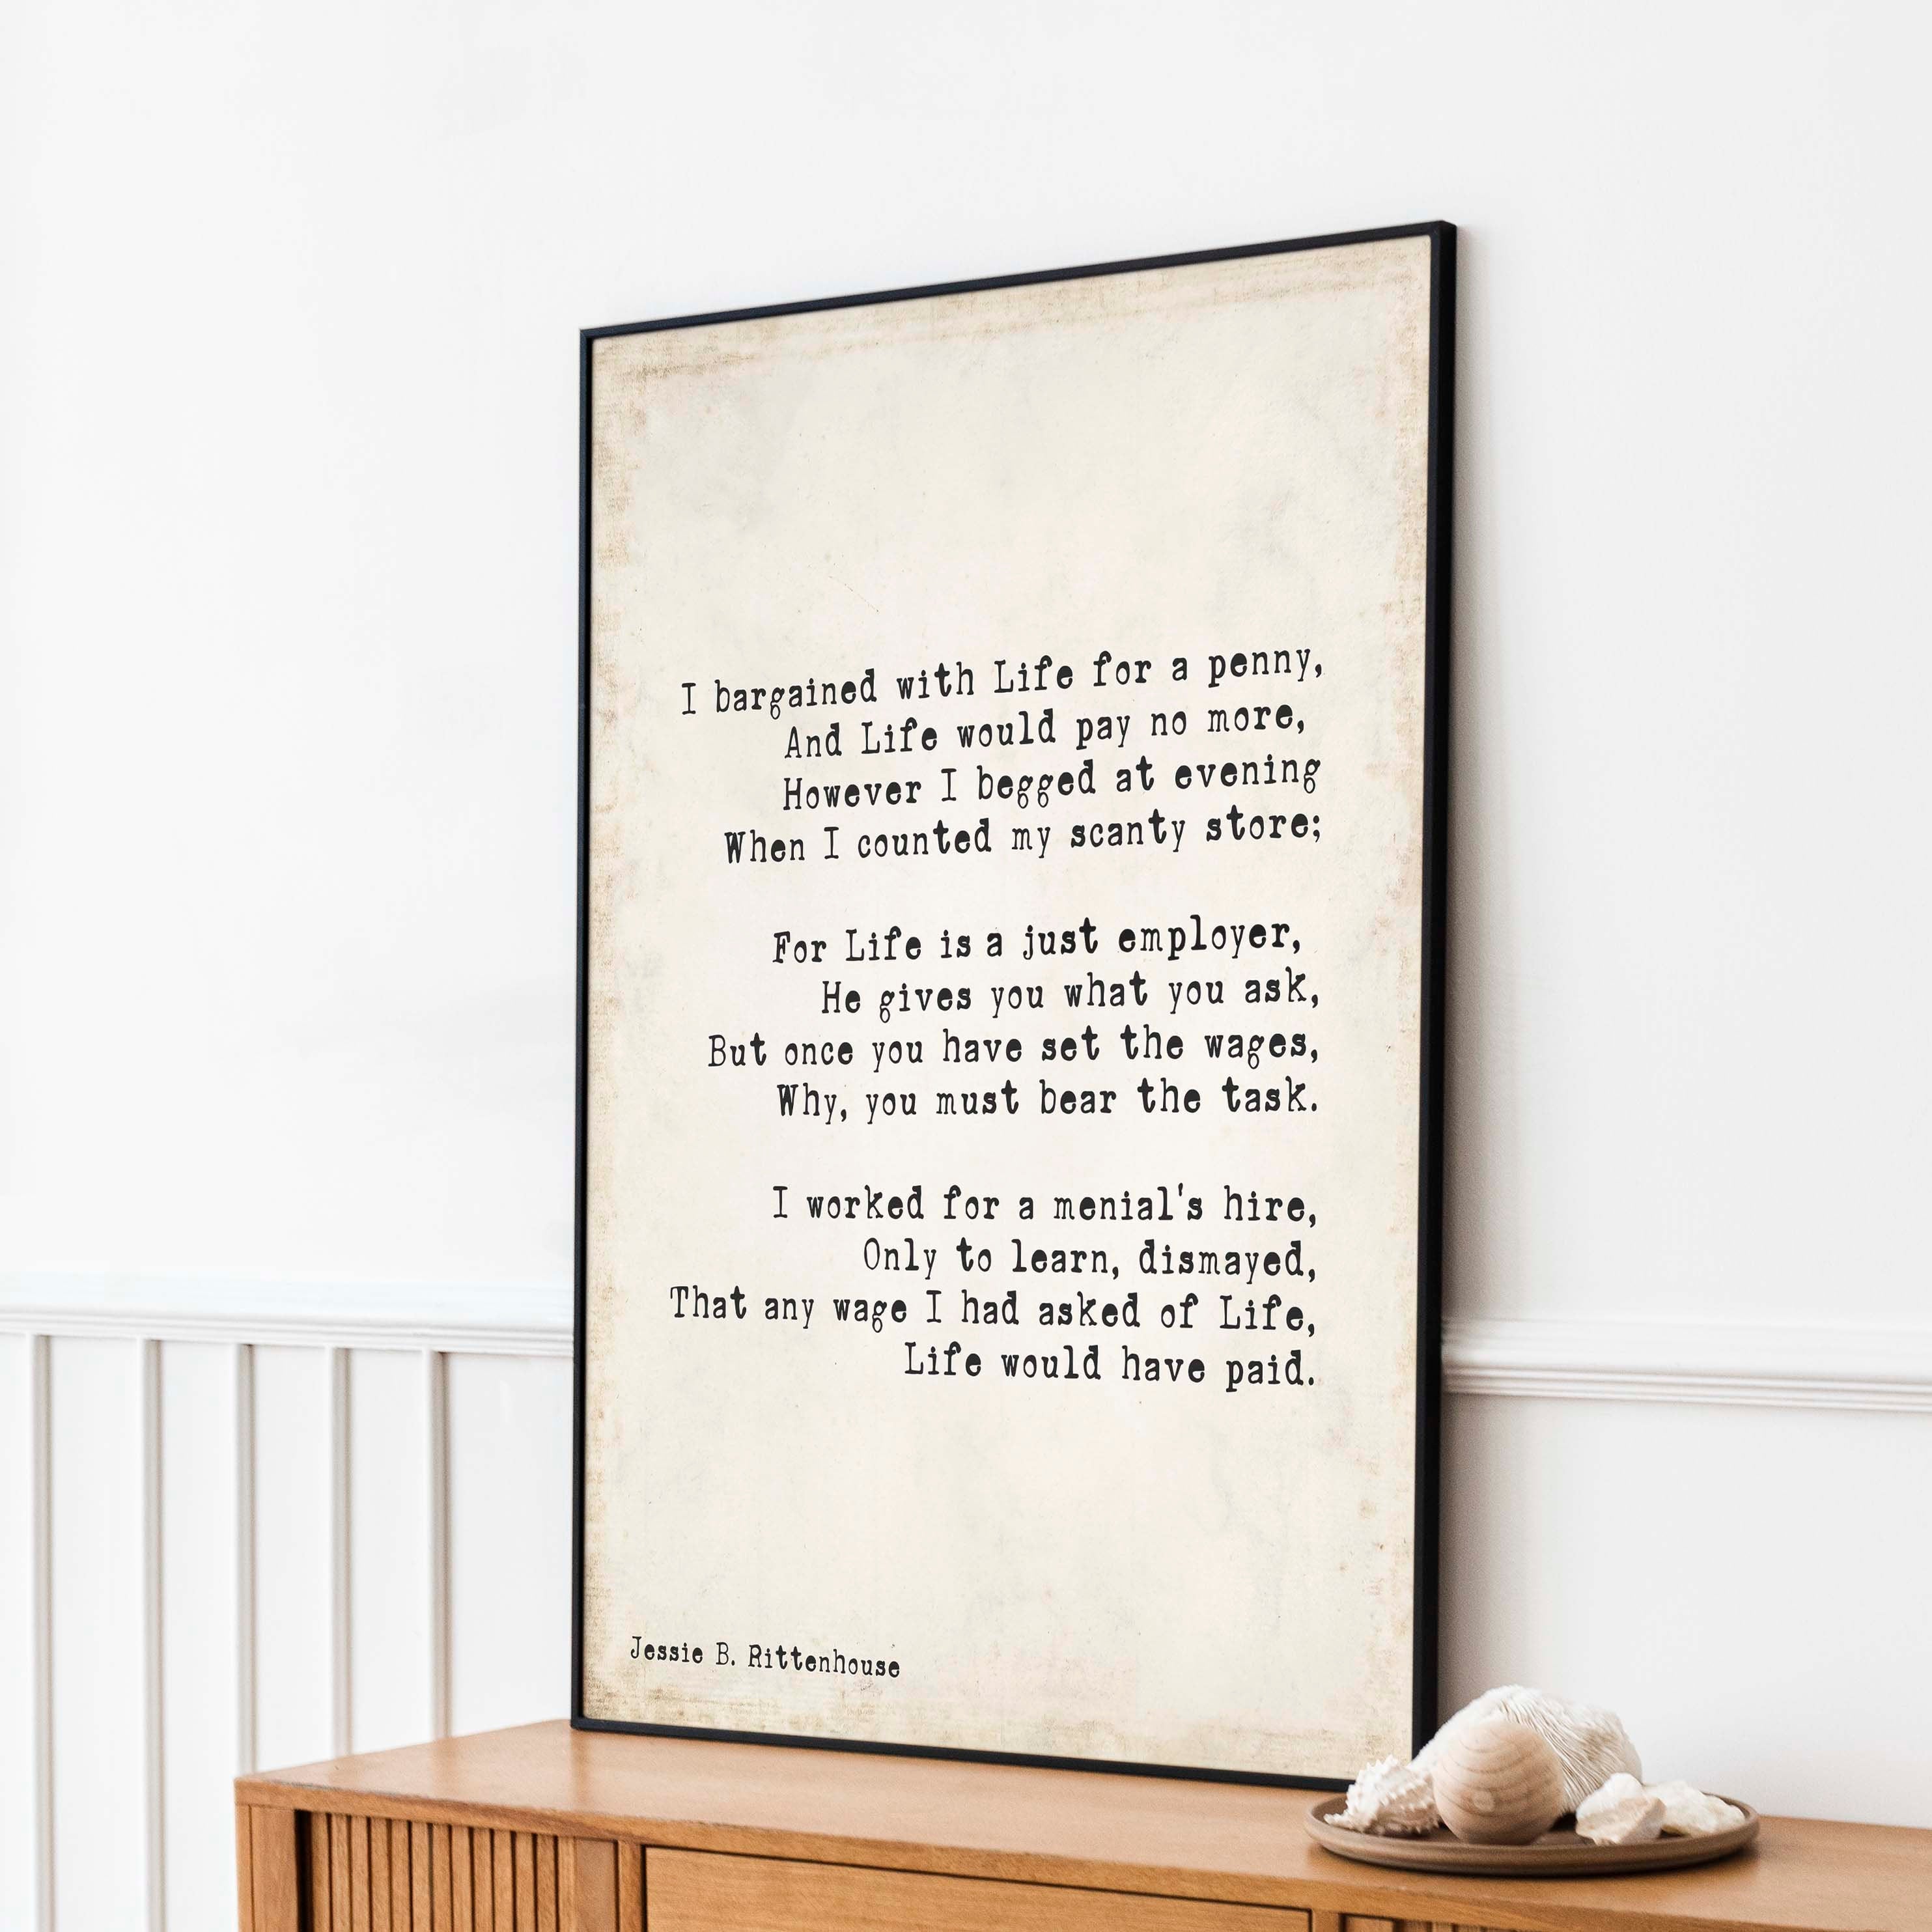 I Bargained With Life For a Penny Poem Motivational Poster Positive Wall Art, Large Vintage Style Wall Art Quote Print Unframed